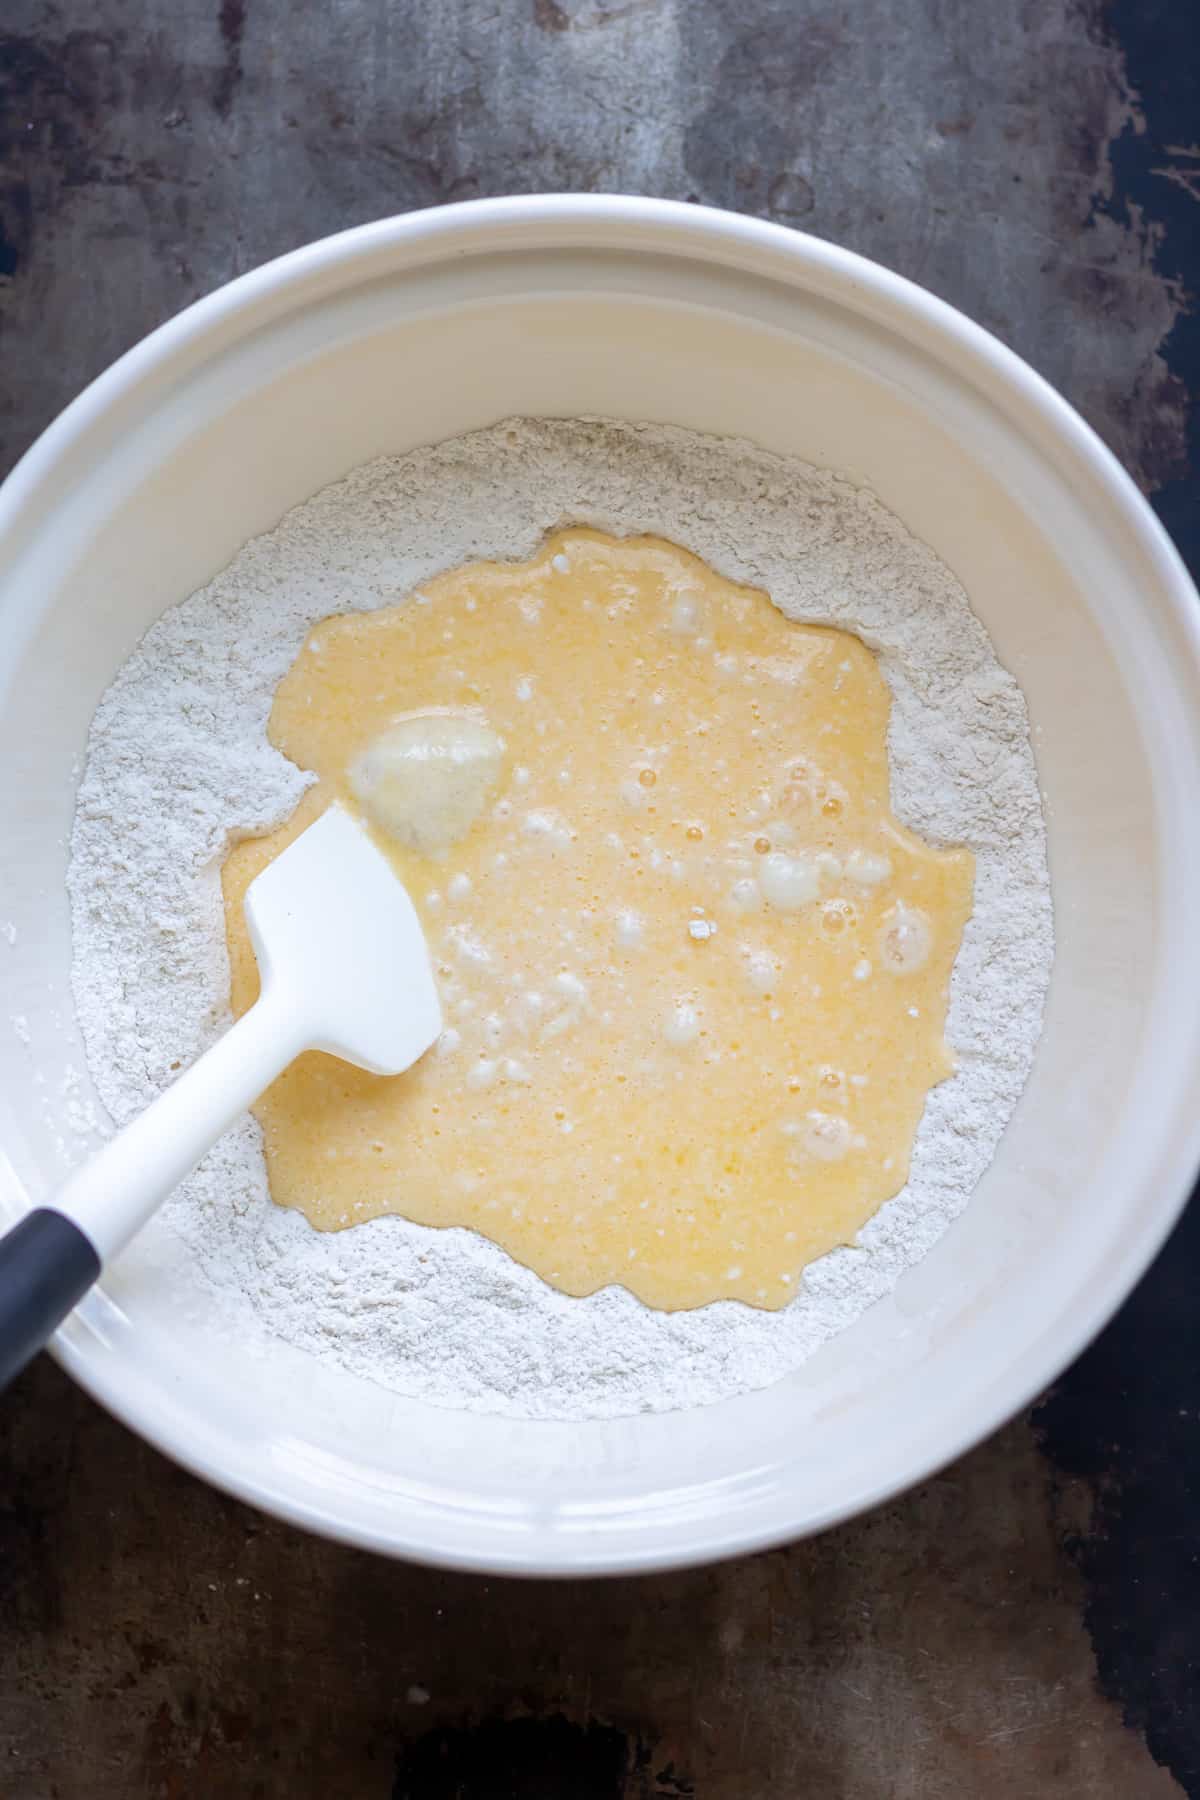 Mixing the wet ingredients into the dry.